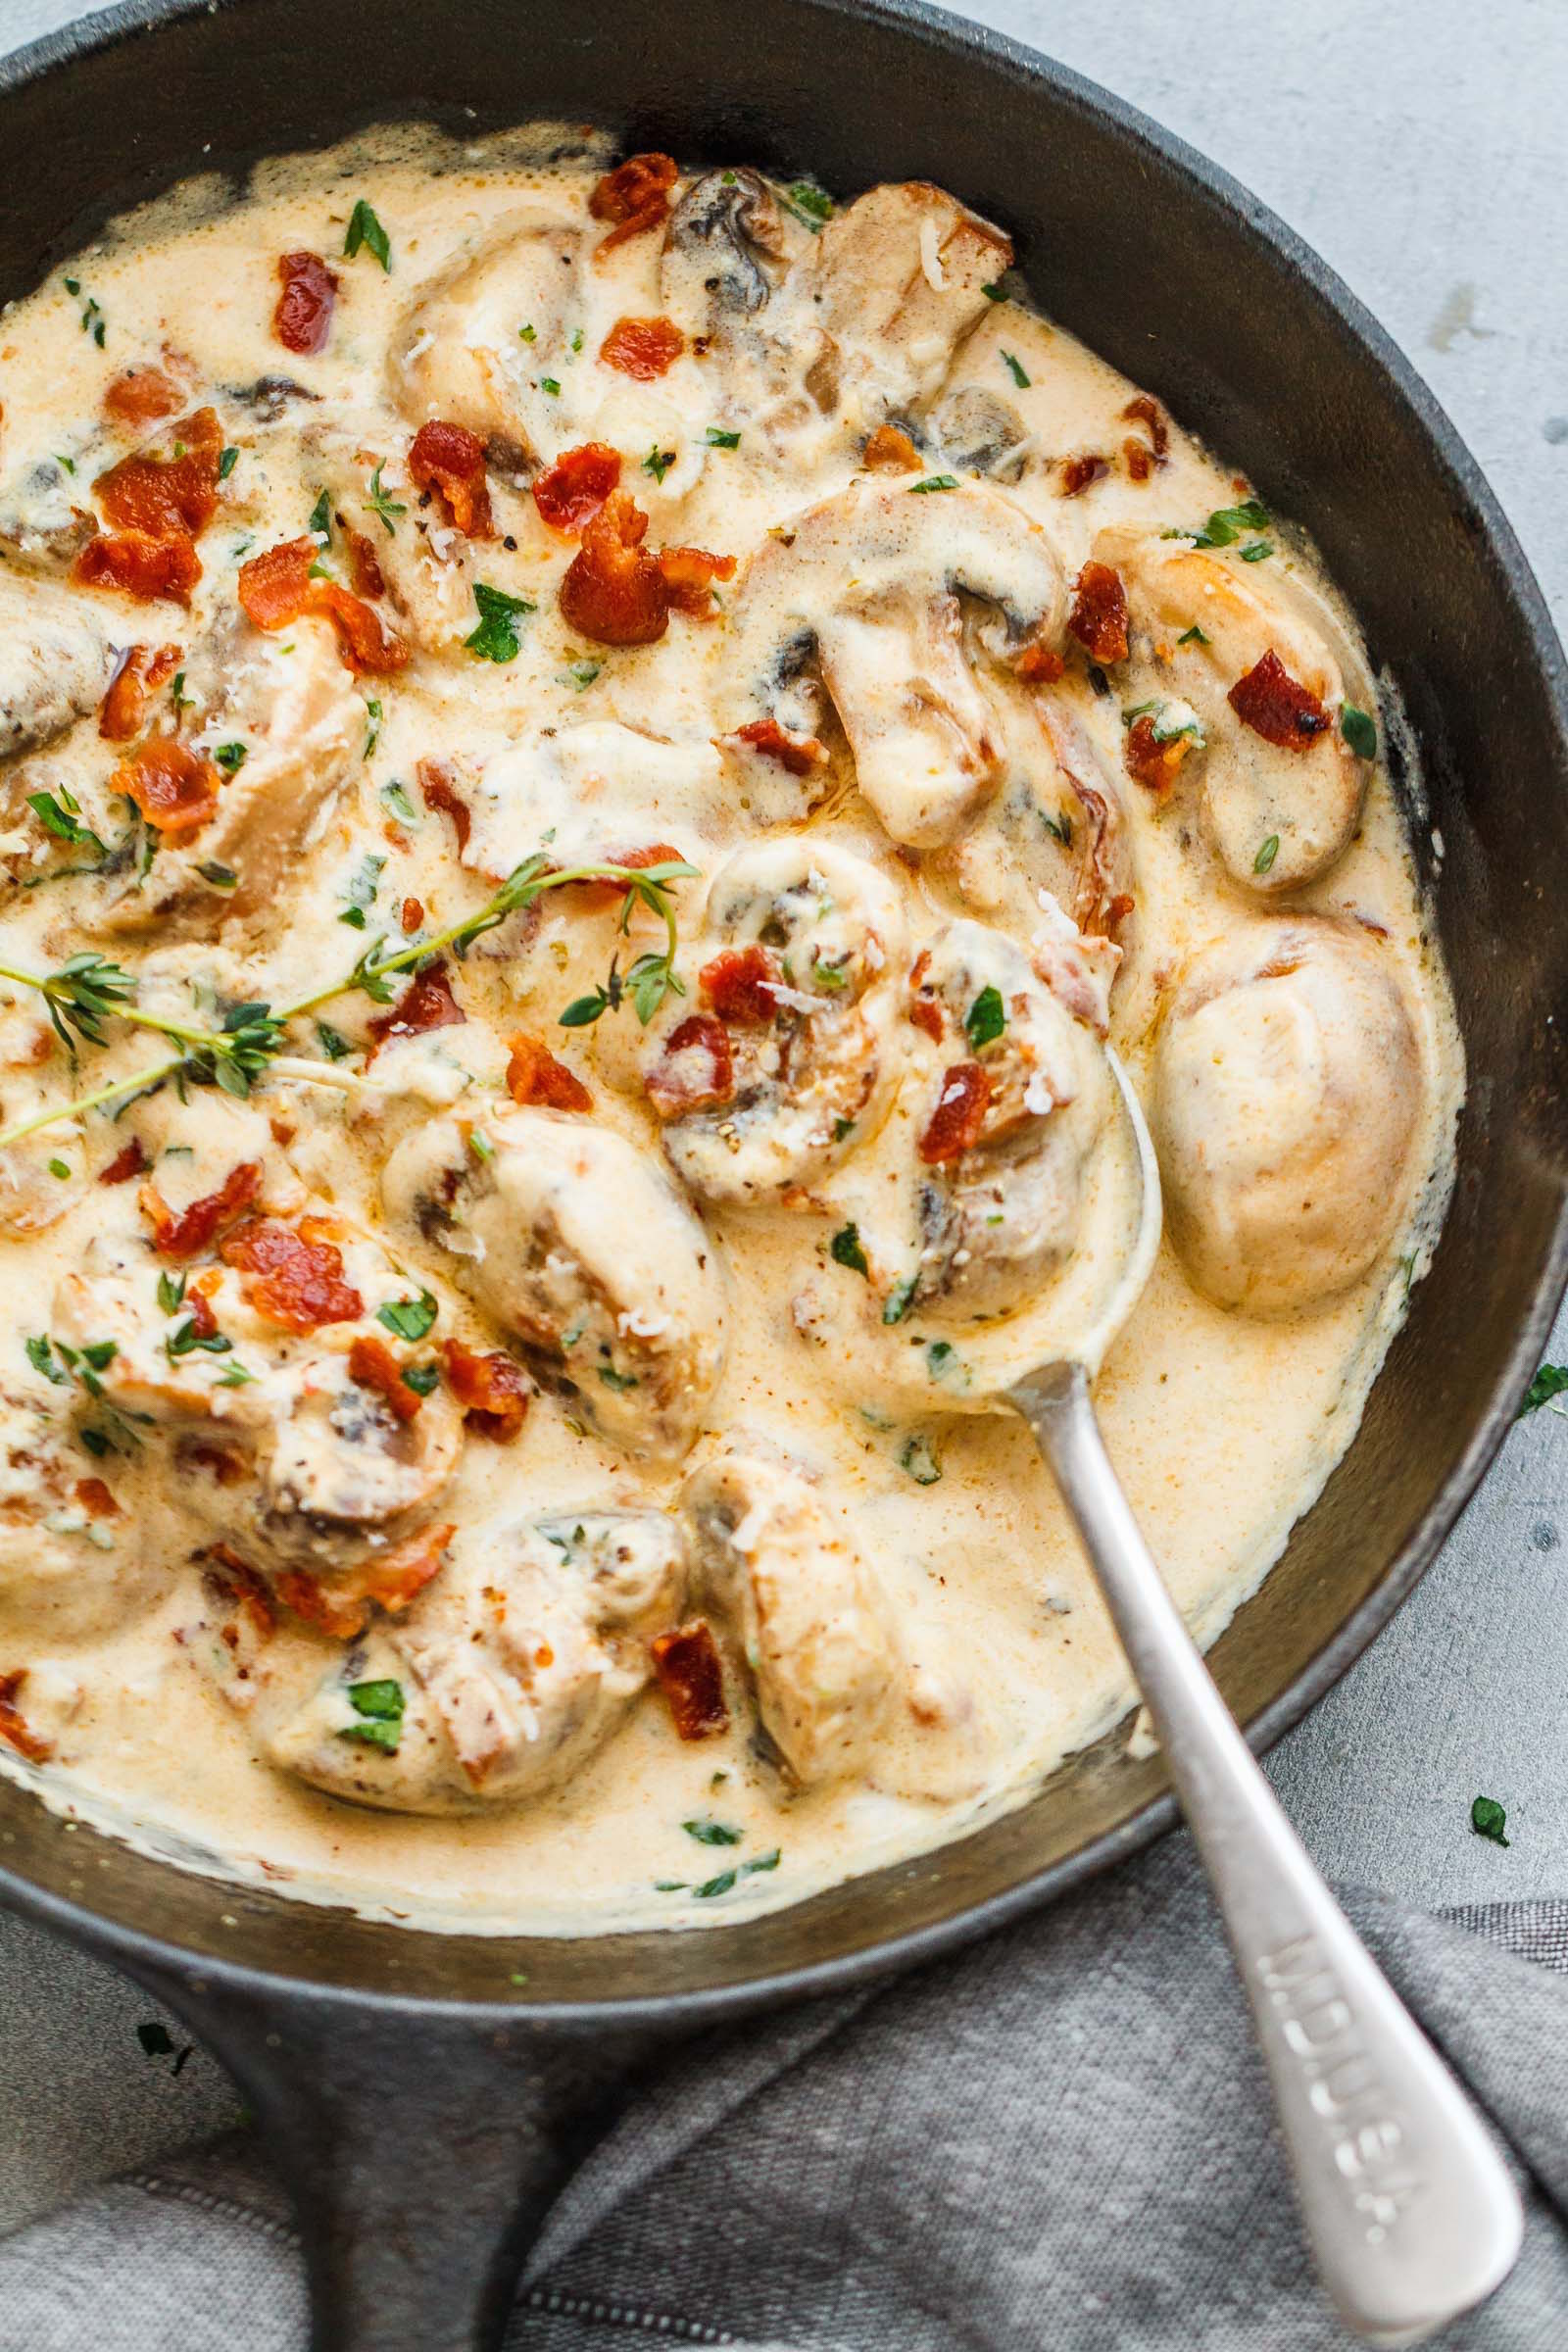 Creamy Garlic Parmesan Mushrooms with Bacon - A decadent garlic parmesan mushroom cream sauce that will have you licking your plate clean!